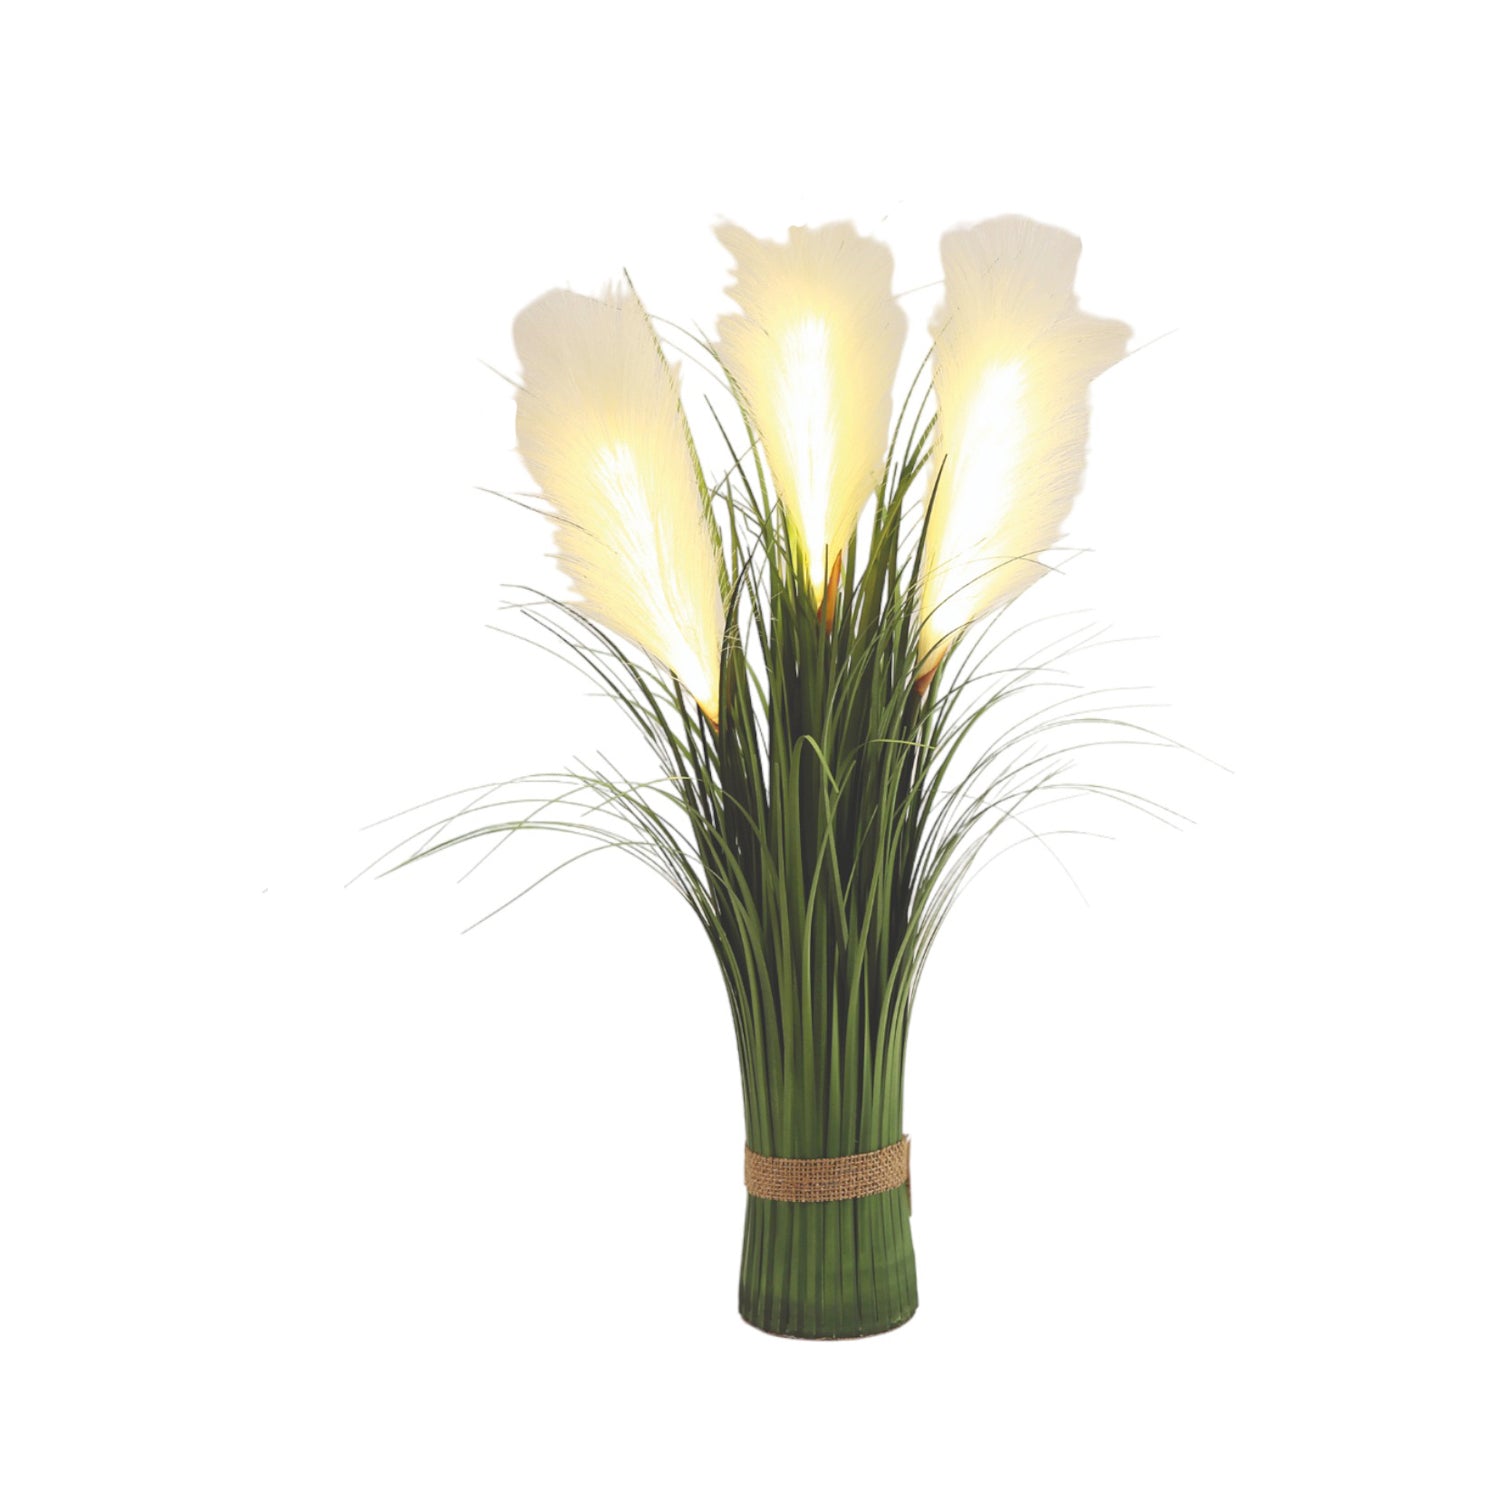 The Home Collection Light Up Floral Reed grass 1 Shaws Department Stores